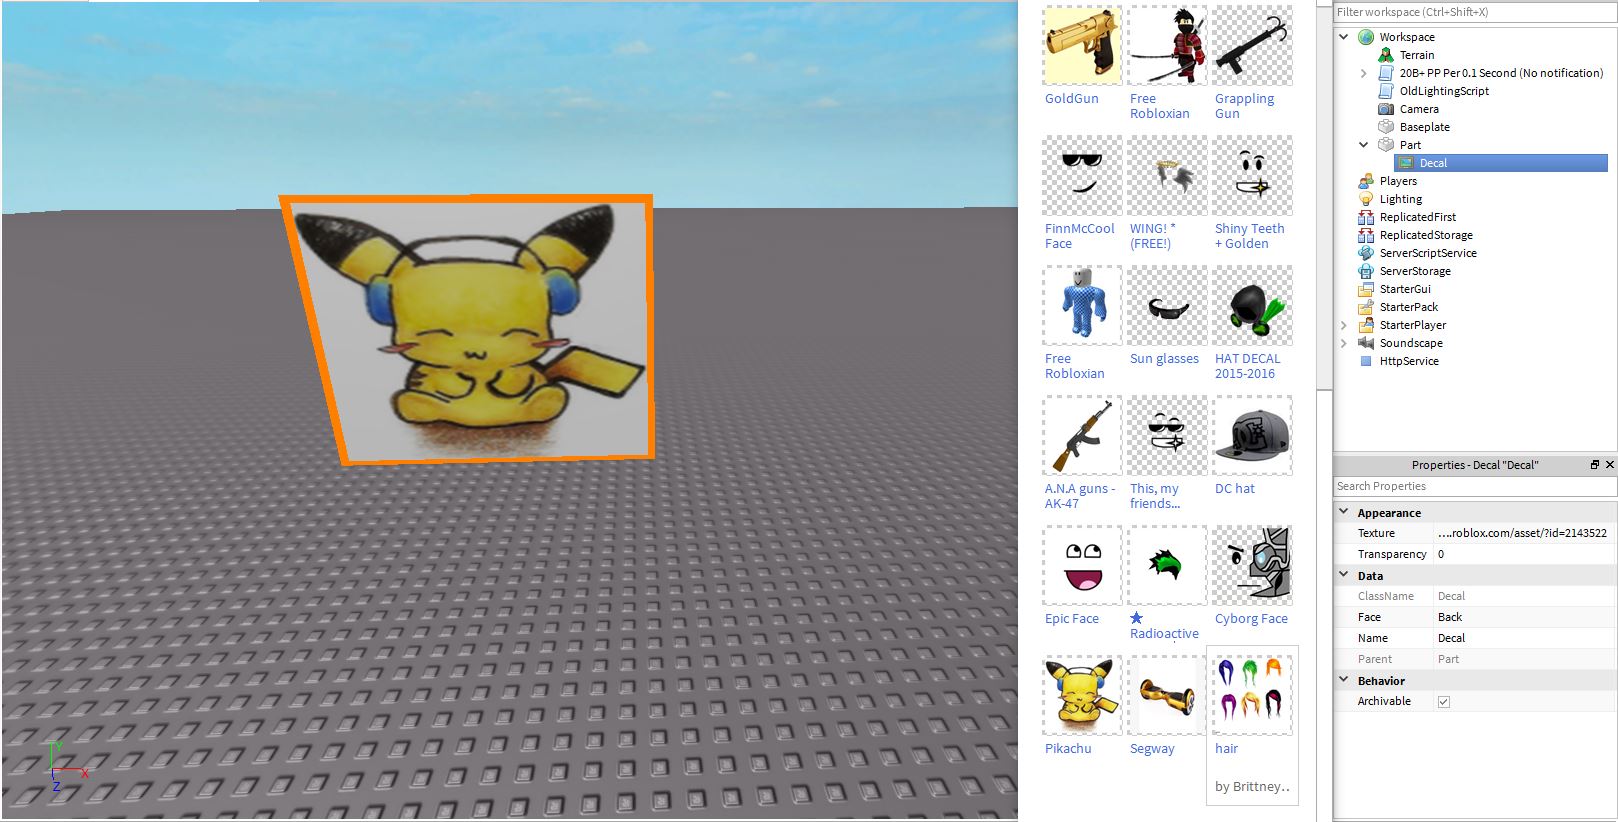 Roblox decals – how to create and upload your own designs